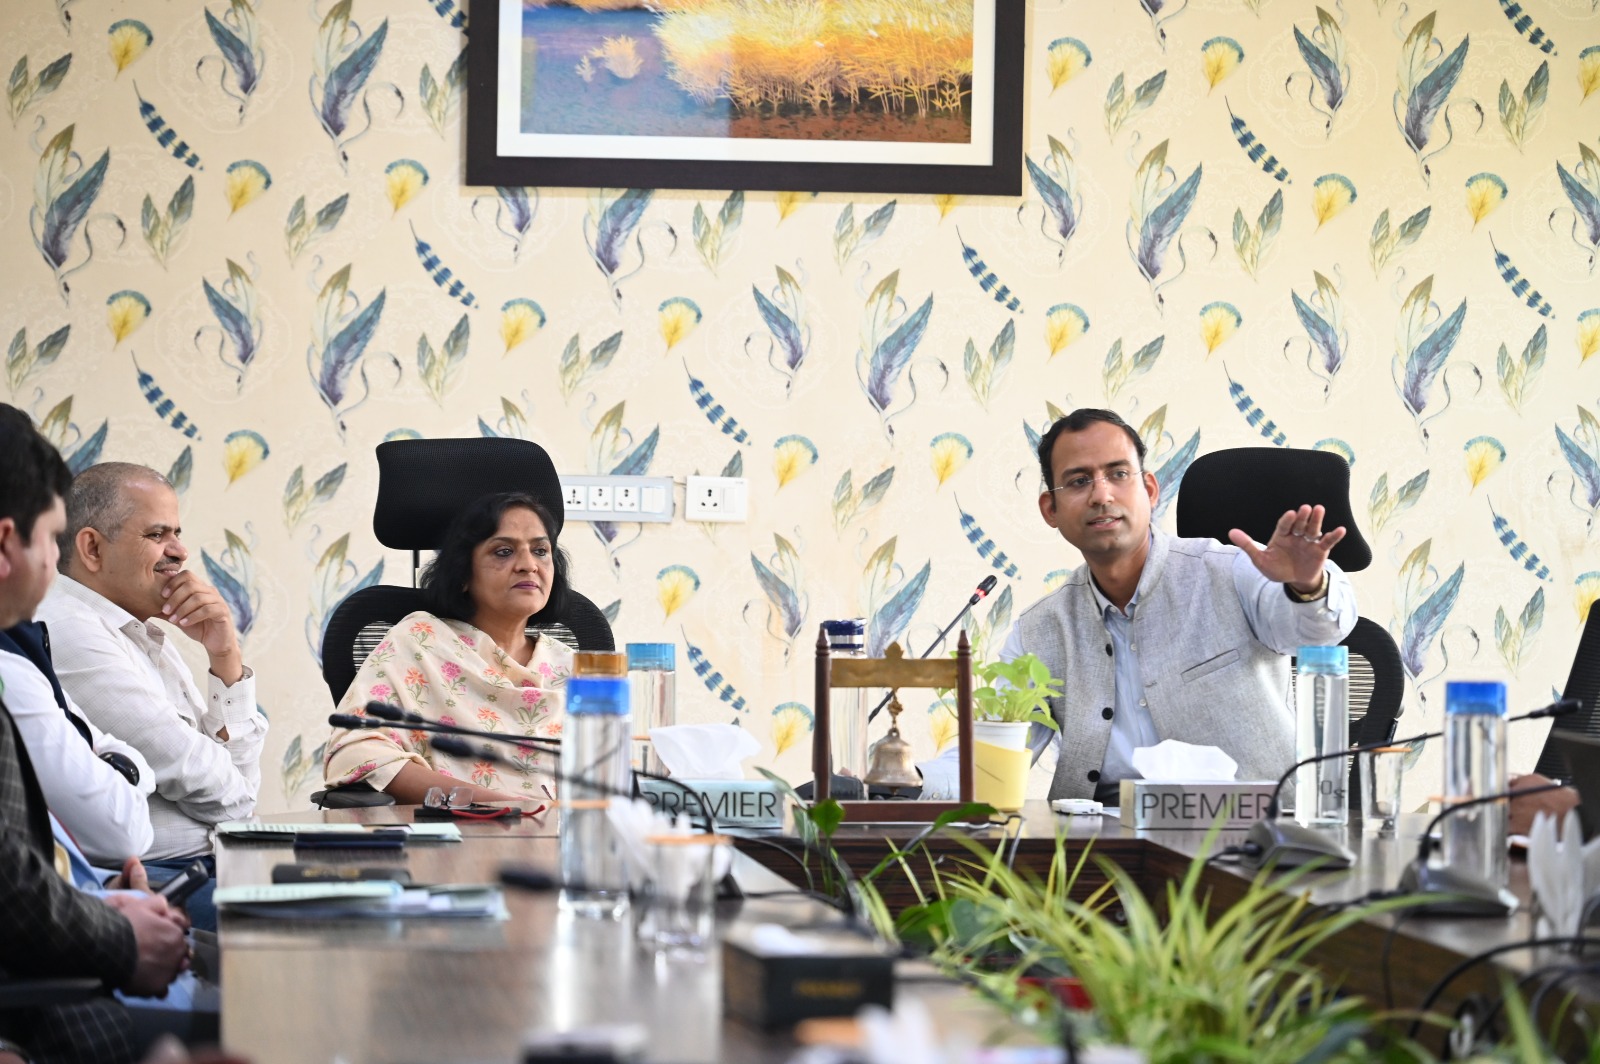 Ms. Nivedita Shukla Verma, Secretary of the Government of India, Department of Chemicals & Petrochemicals, visited the AMTZ ecosystem and met Dr. Jitendra Sharma, MD & Founder CEO of AMTZ at the Advanced Technology campus to discuss Health Care and Medical Care in India